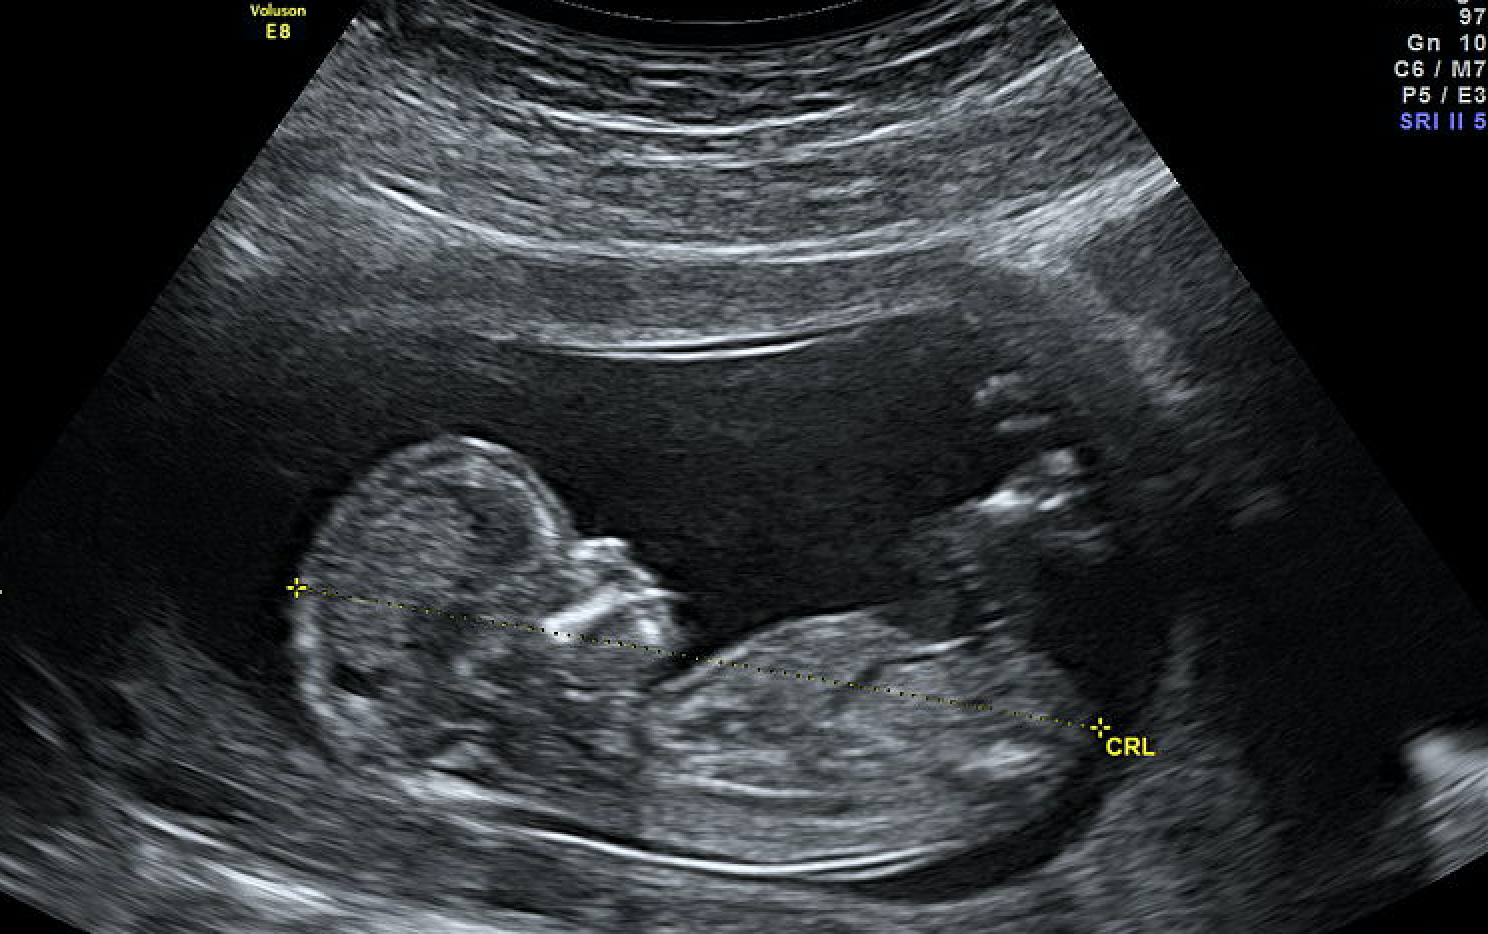 ultrasound of a baby